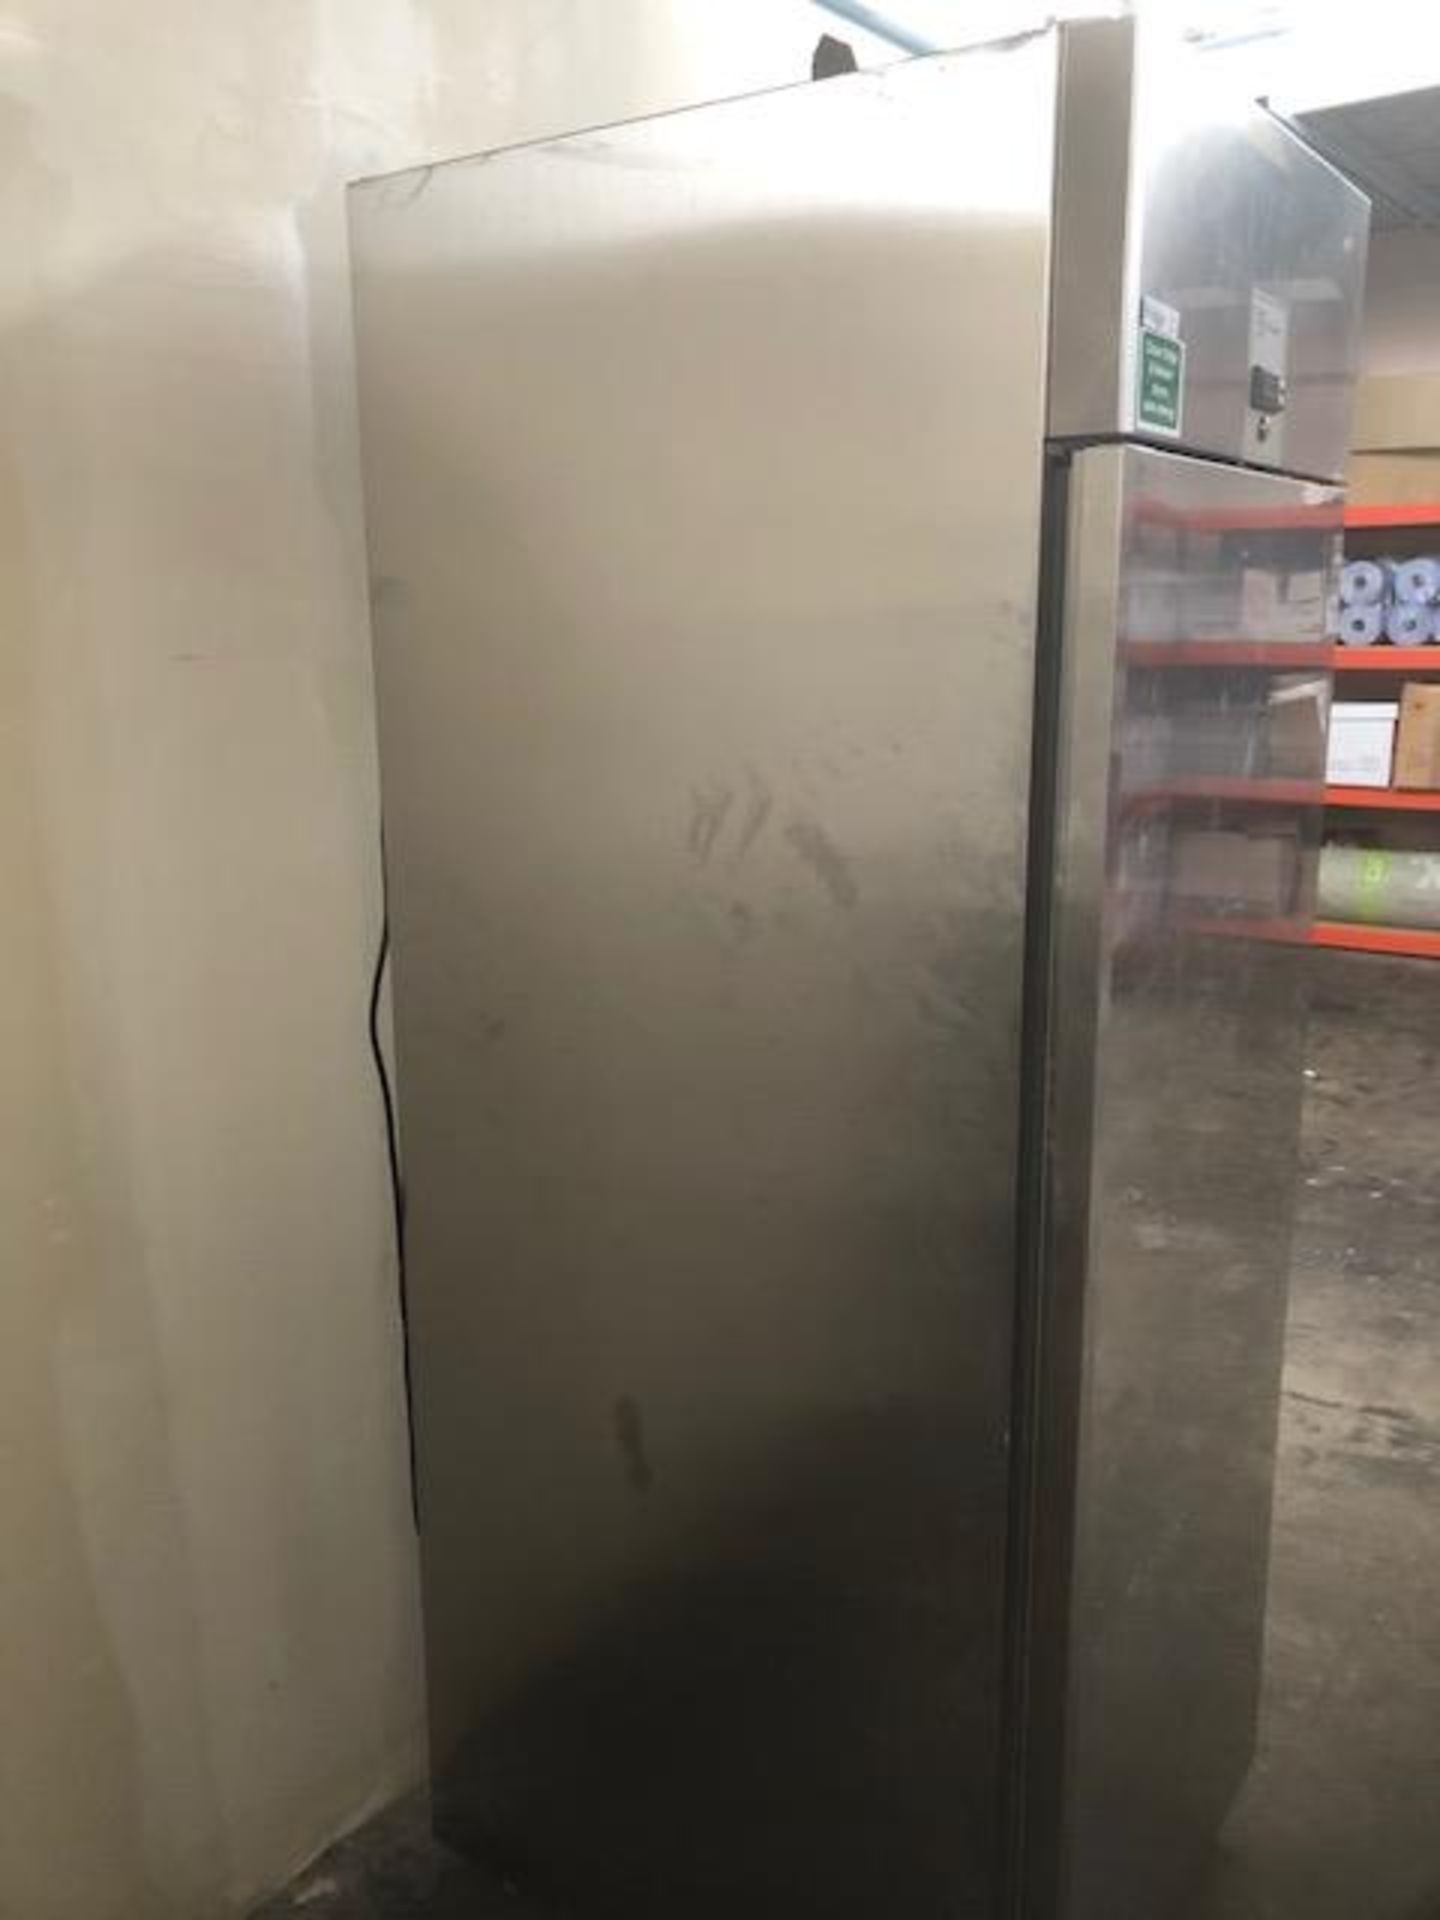 Electrolux Single Door Upright Stainless Steel Refrigerator - Image 2 of 5